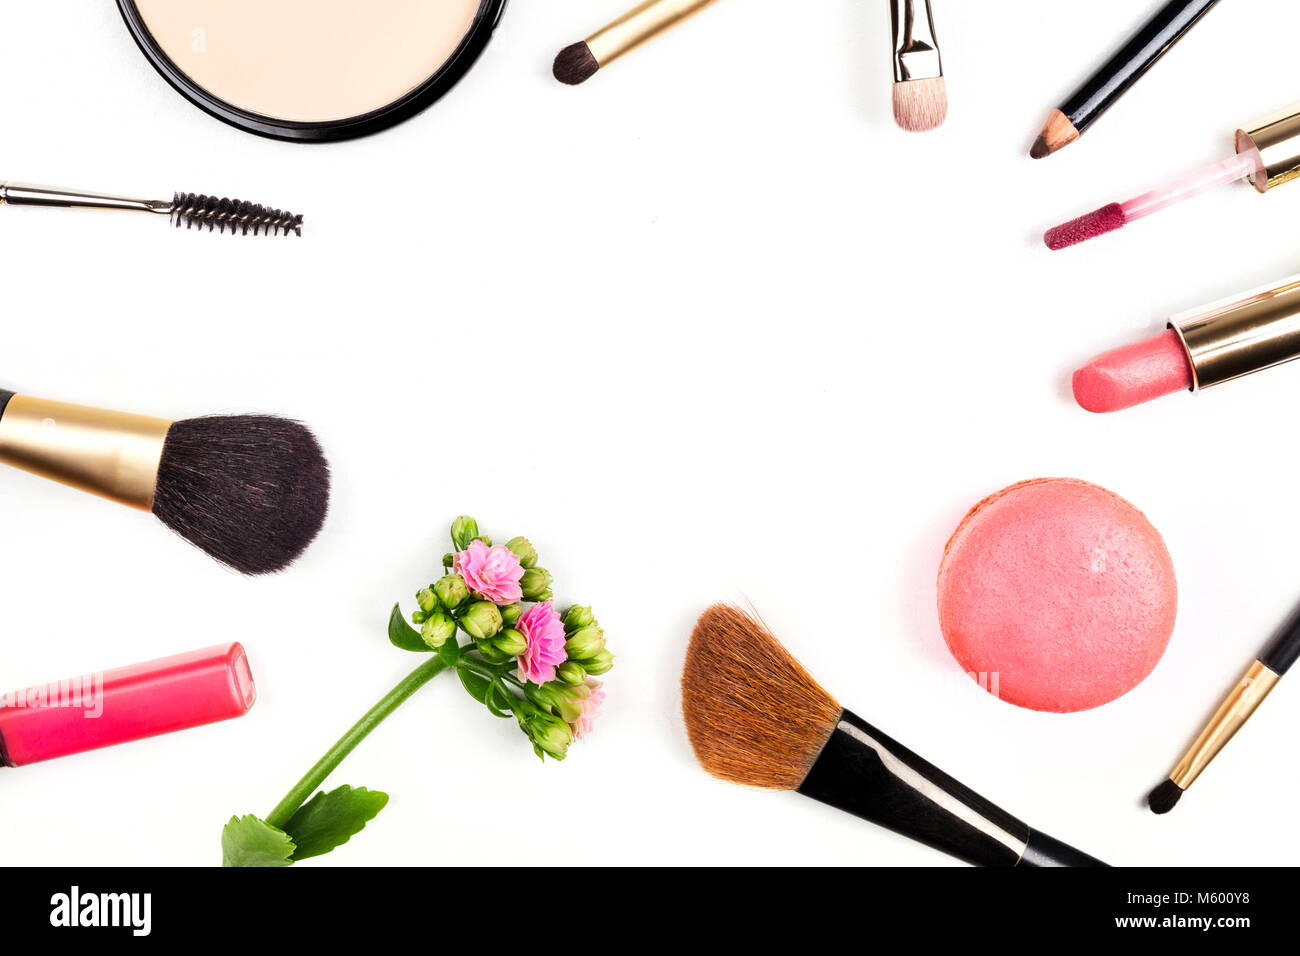 A frame of makeup brushes, powder, lipstick, and a mascara applicator, shot from above on a white background with a pink flower and a macaroon, with a Stock Photo